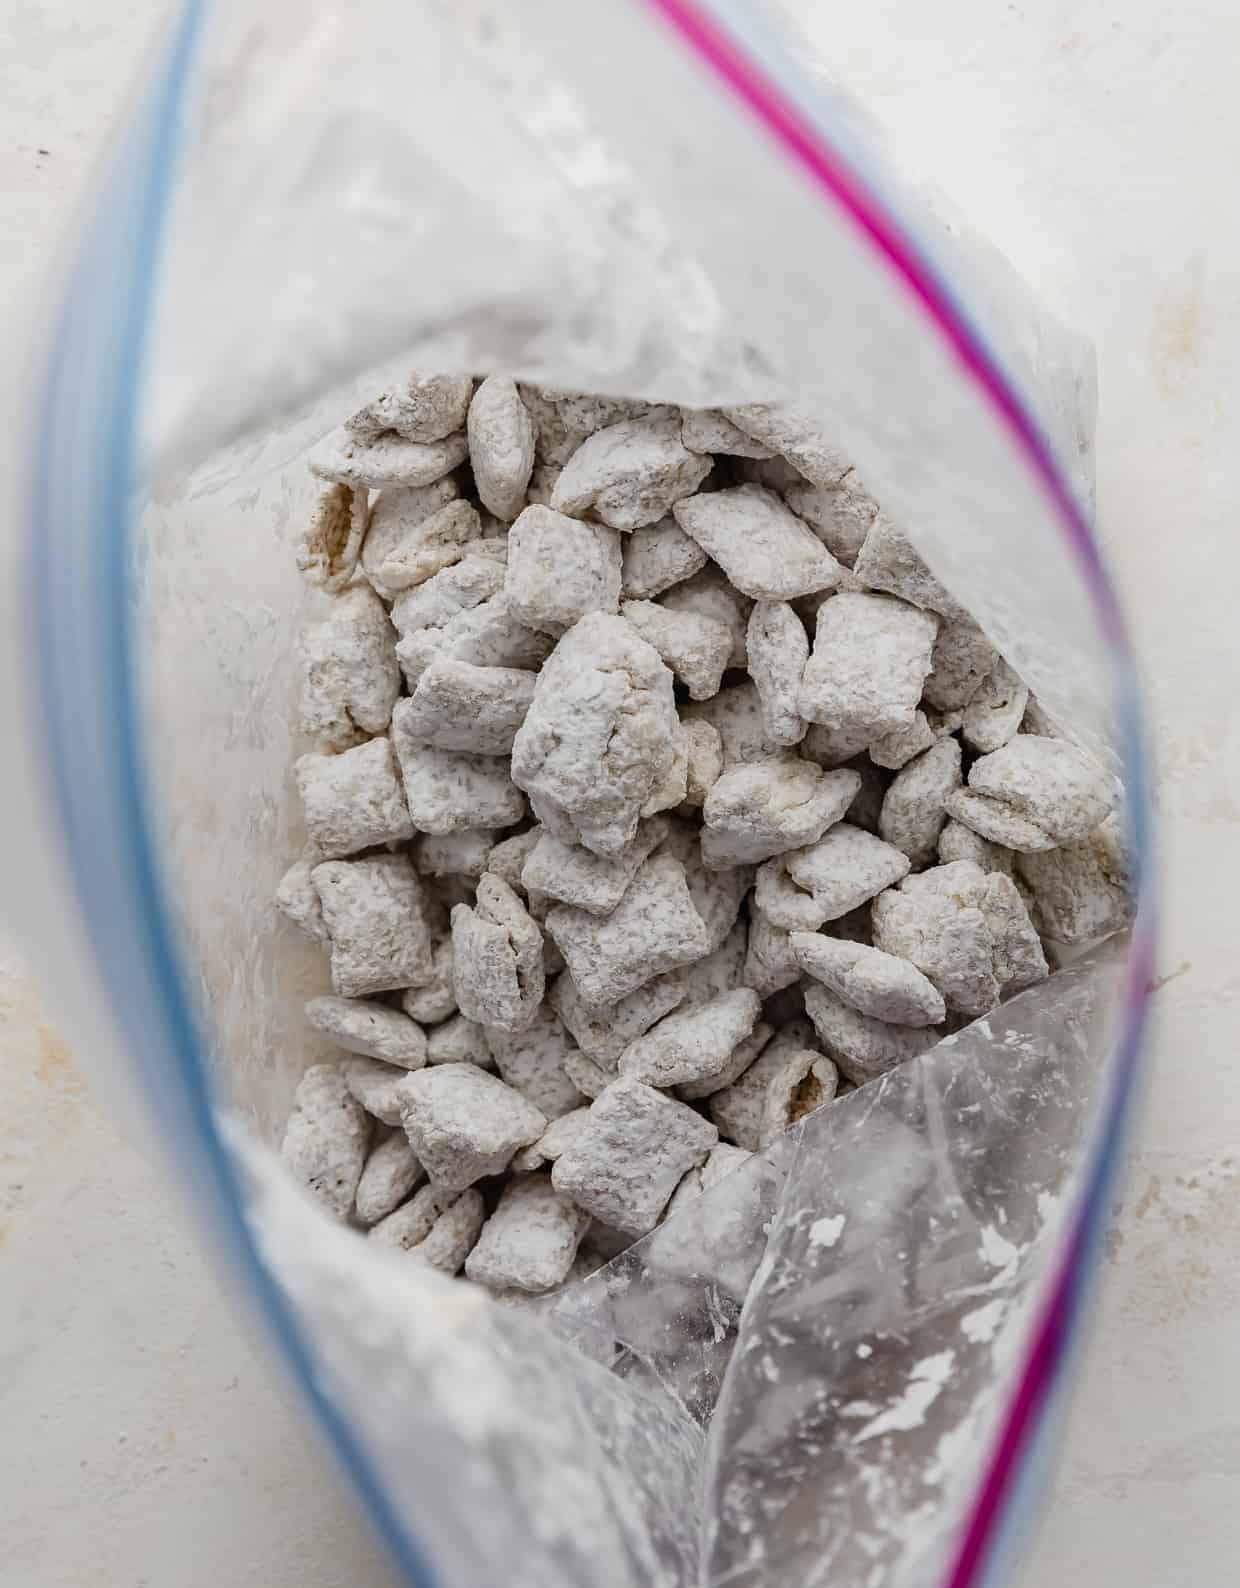 Overhead photo of an open Ziplock bag full of powdered sugar covered white Chex cereal.